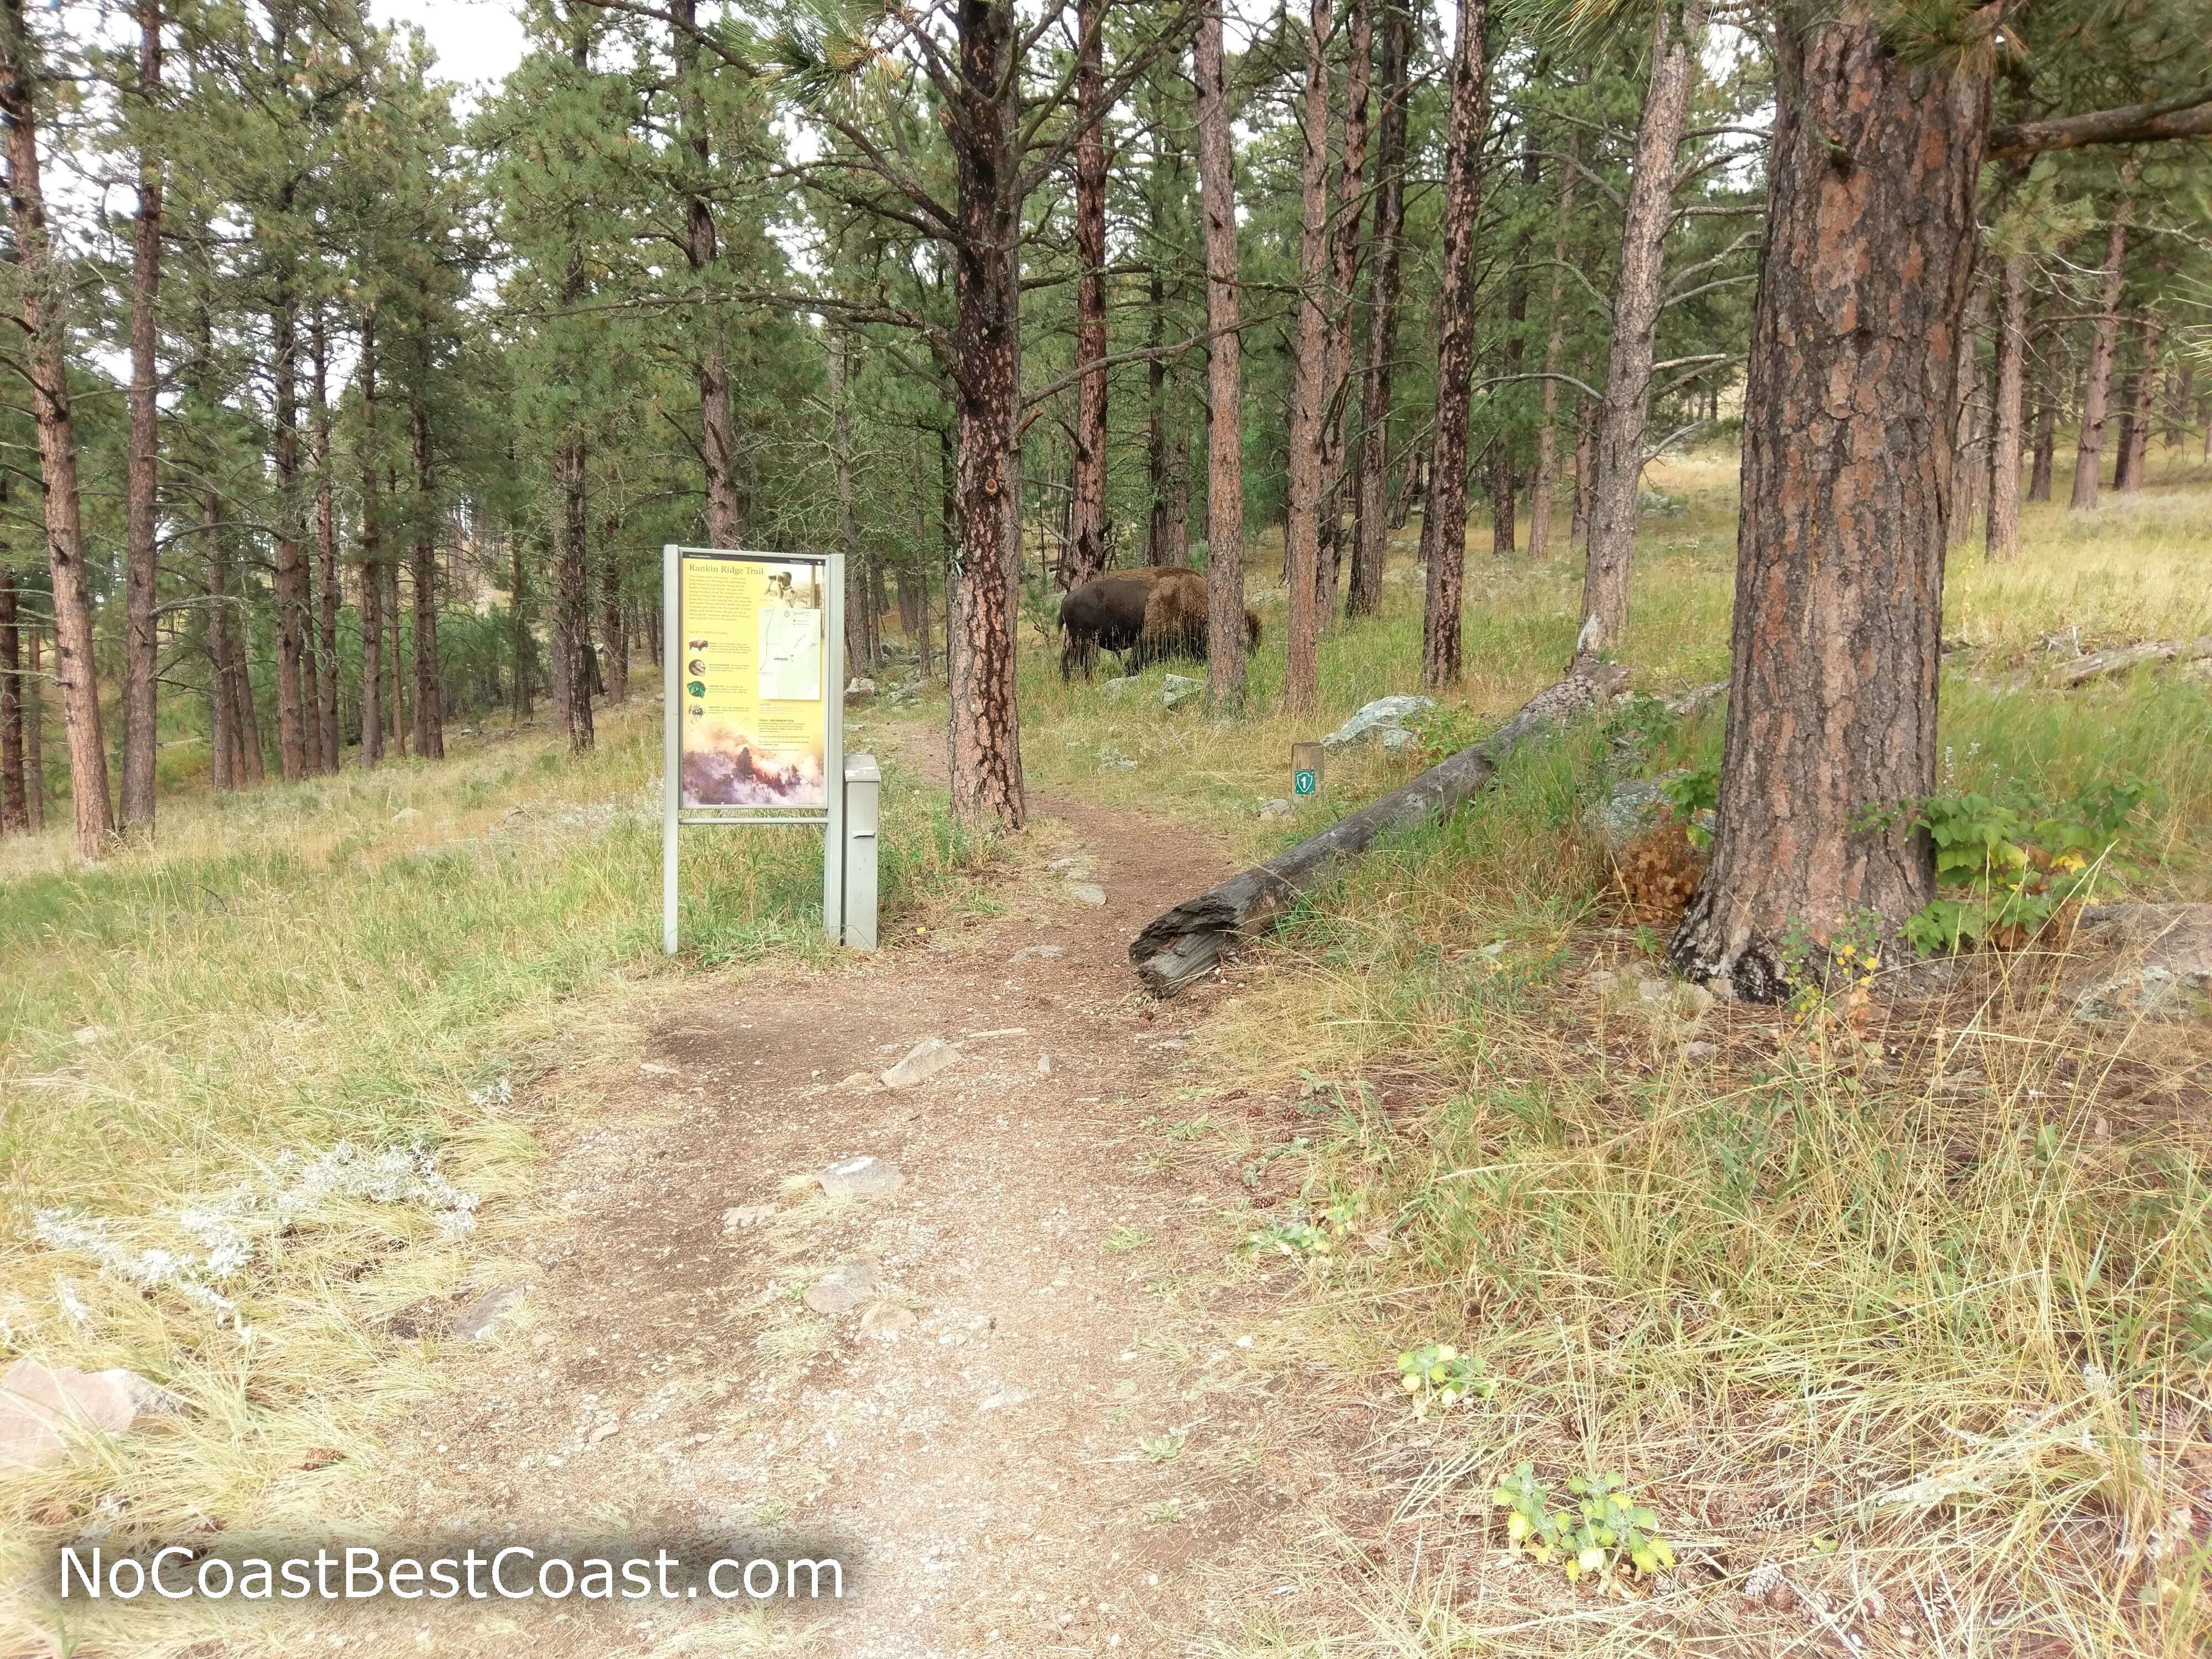 A bison grazing just beyond the trailhead